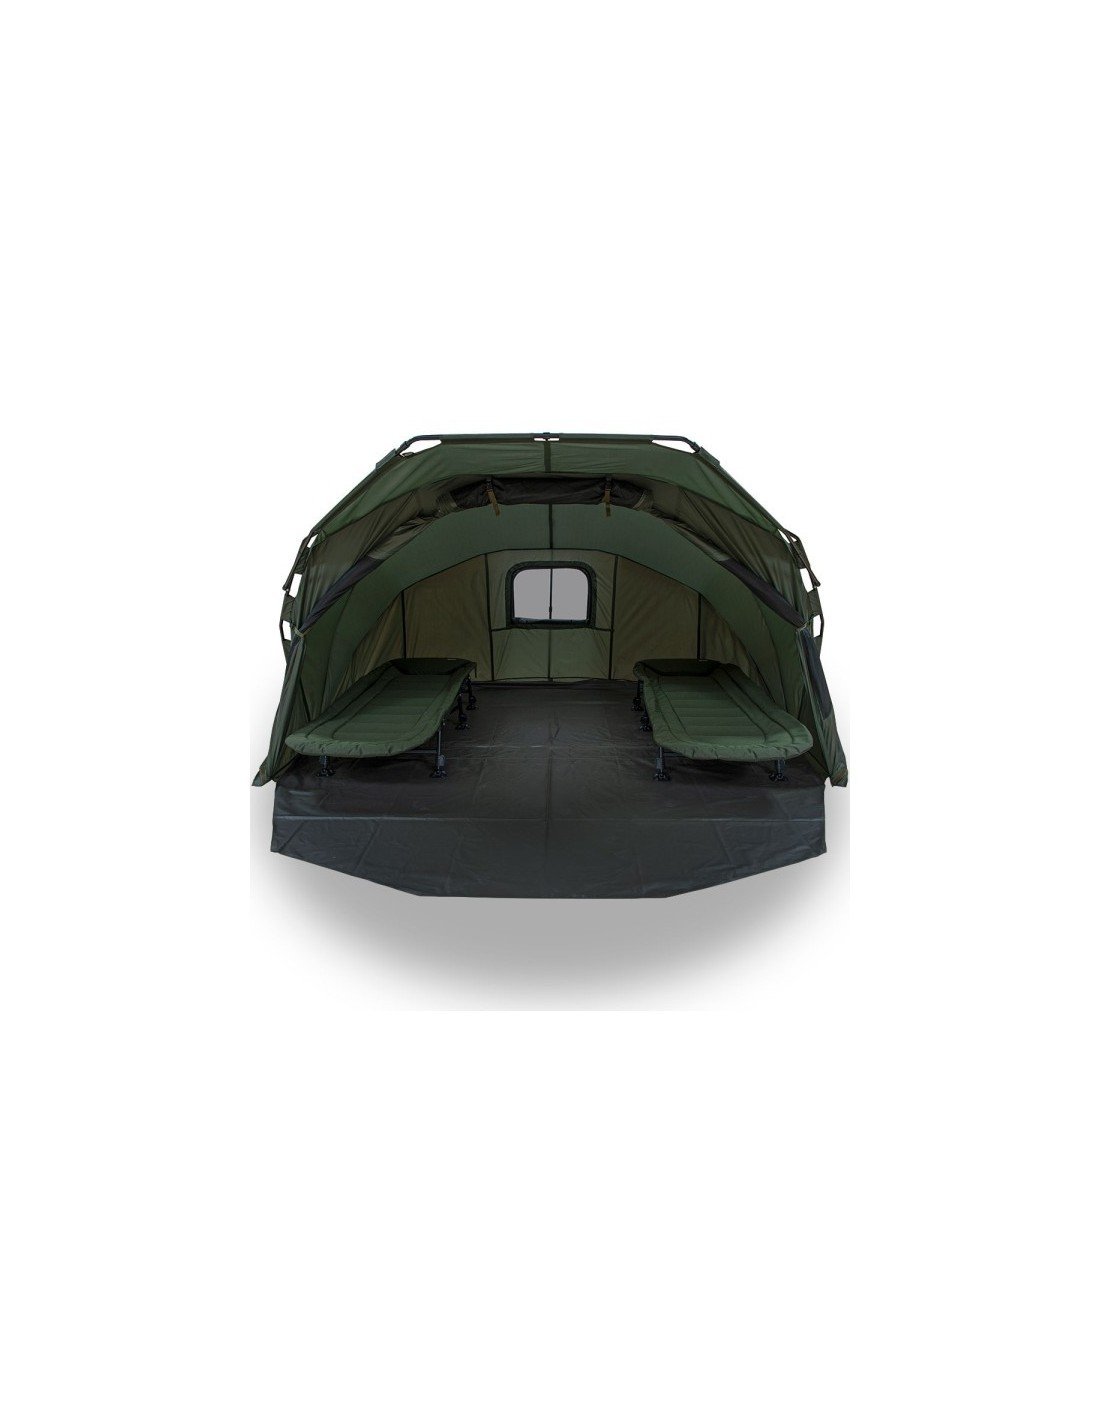 NGT Fortress Bivvy Deluxe XL 2 Man палатка